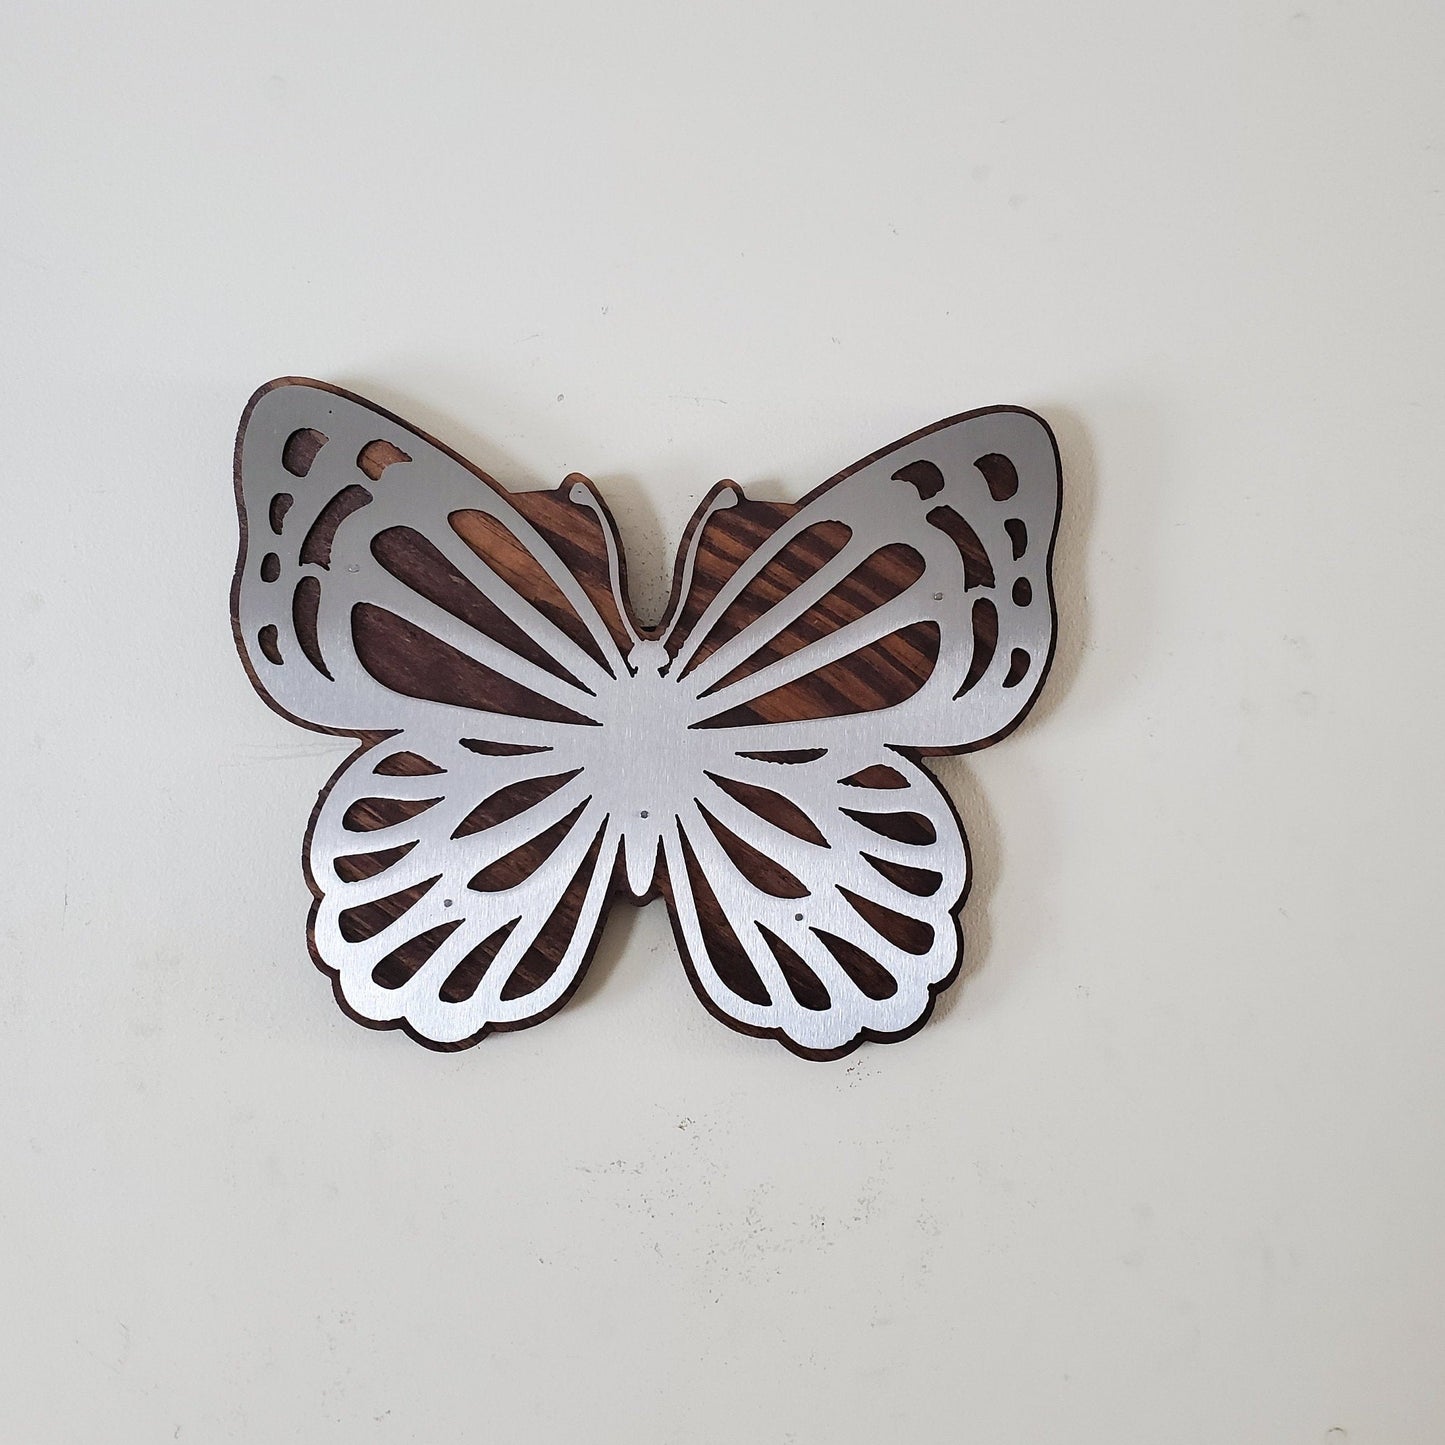 Butterfly Metal Art Wall Decor | Made in USA | Butterfly wood and steel wall sculpture